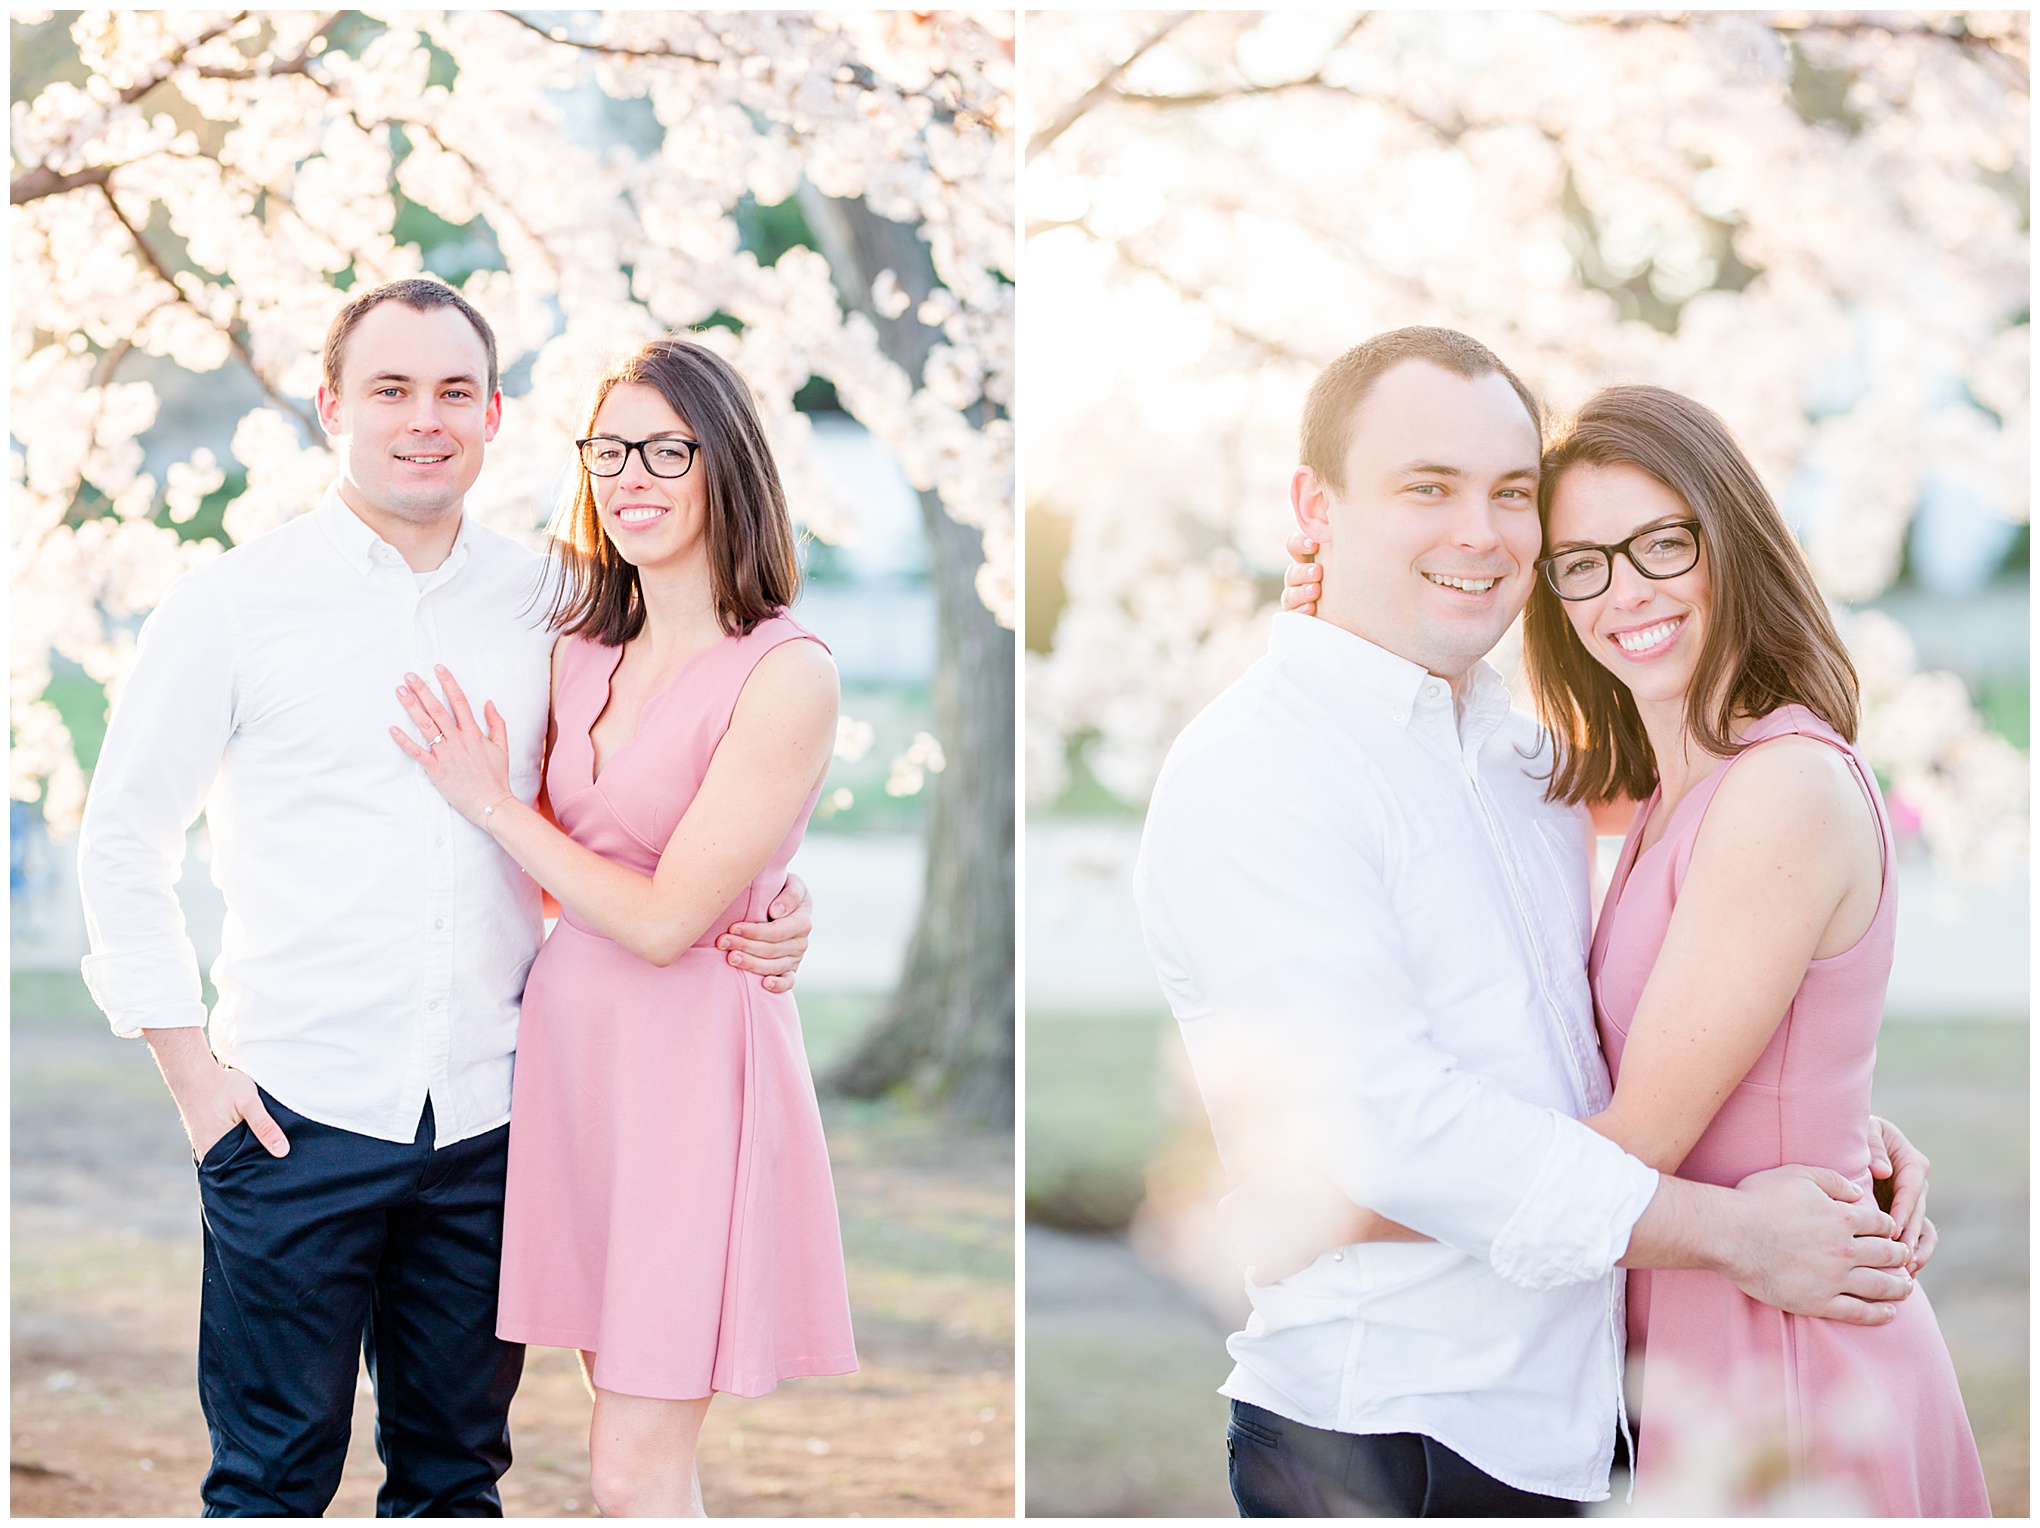 sunny cherry blossoms engagement session, Washington, D.C. engagement photos, Washington D.C. engagement photos, sunrrise engagement photos, cherry blossom engagement photos, D.C. cherry bloossoms, D.C. cherry blossoms photos, cherry blossom photos, cherry blossoms portrraits, sunny engagement photos, classic engagement photos, Rachel E.H. Photography, engagement session style, flowering trees